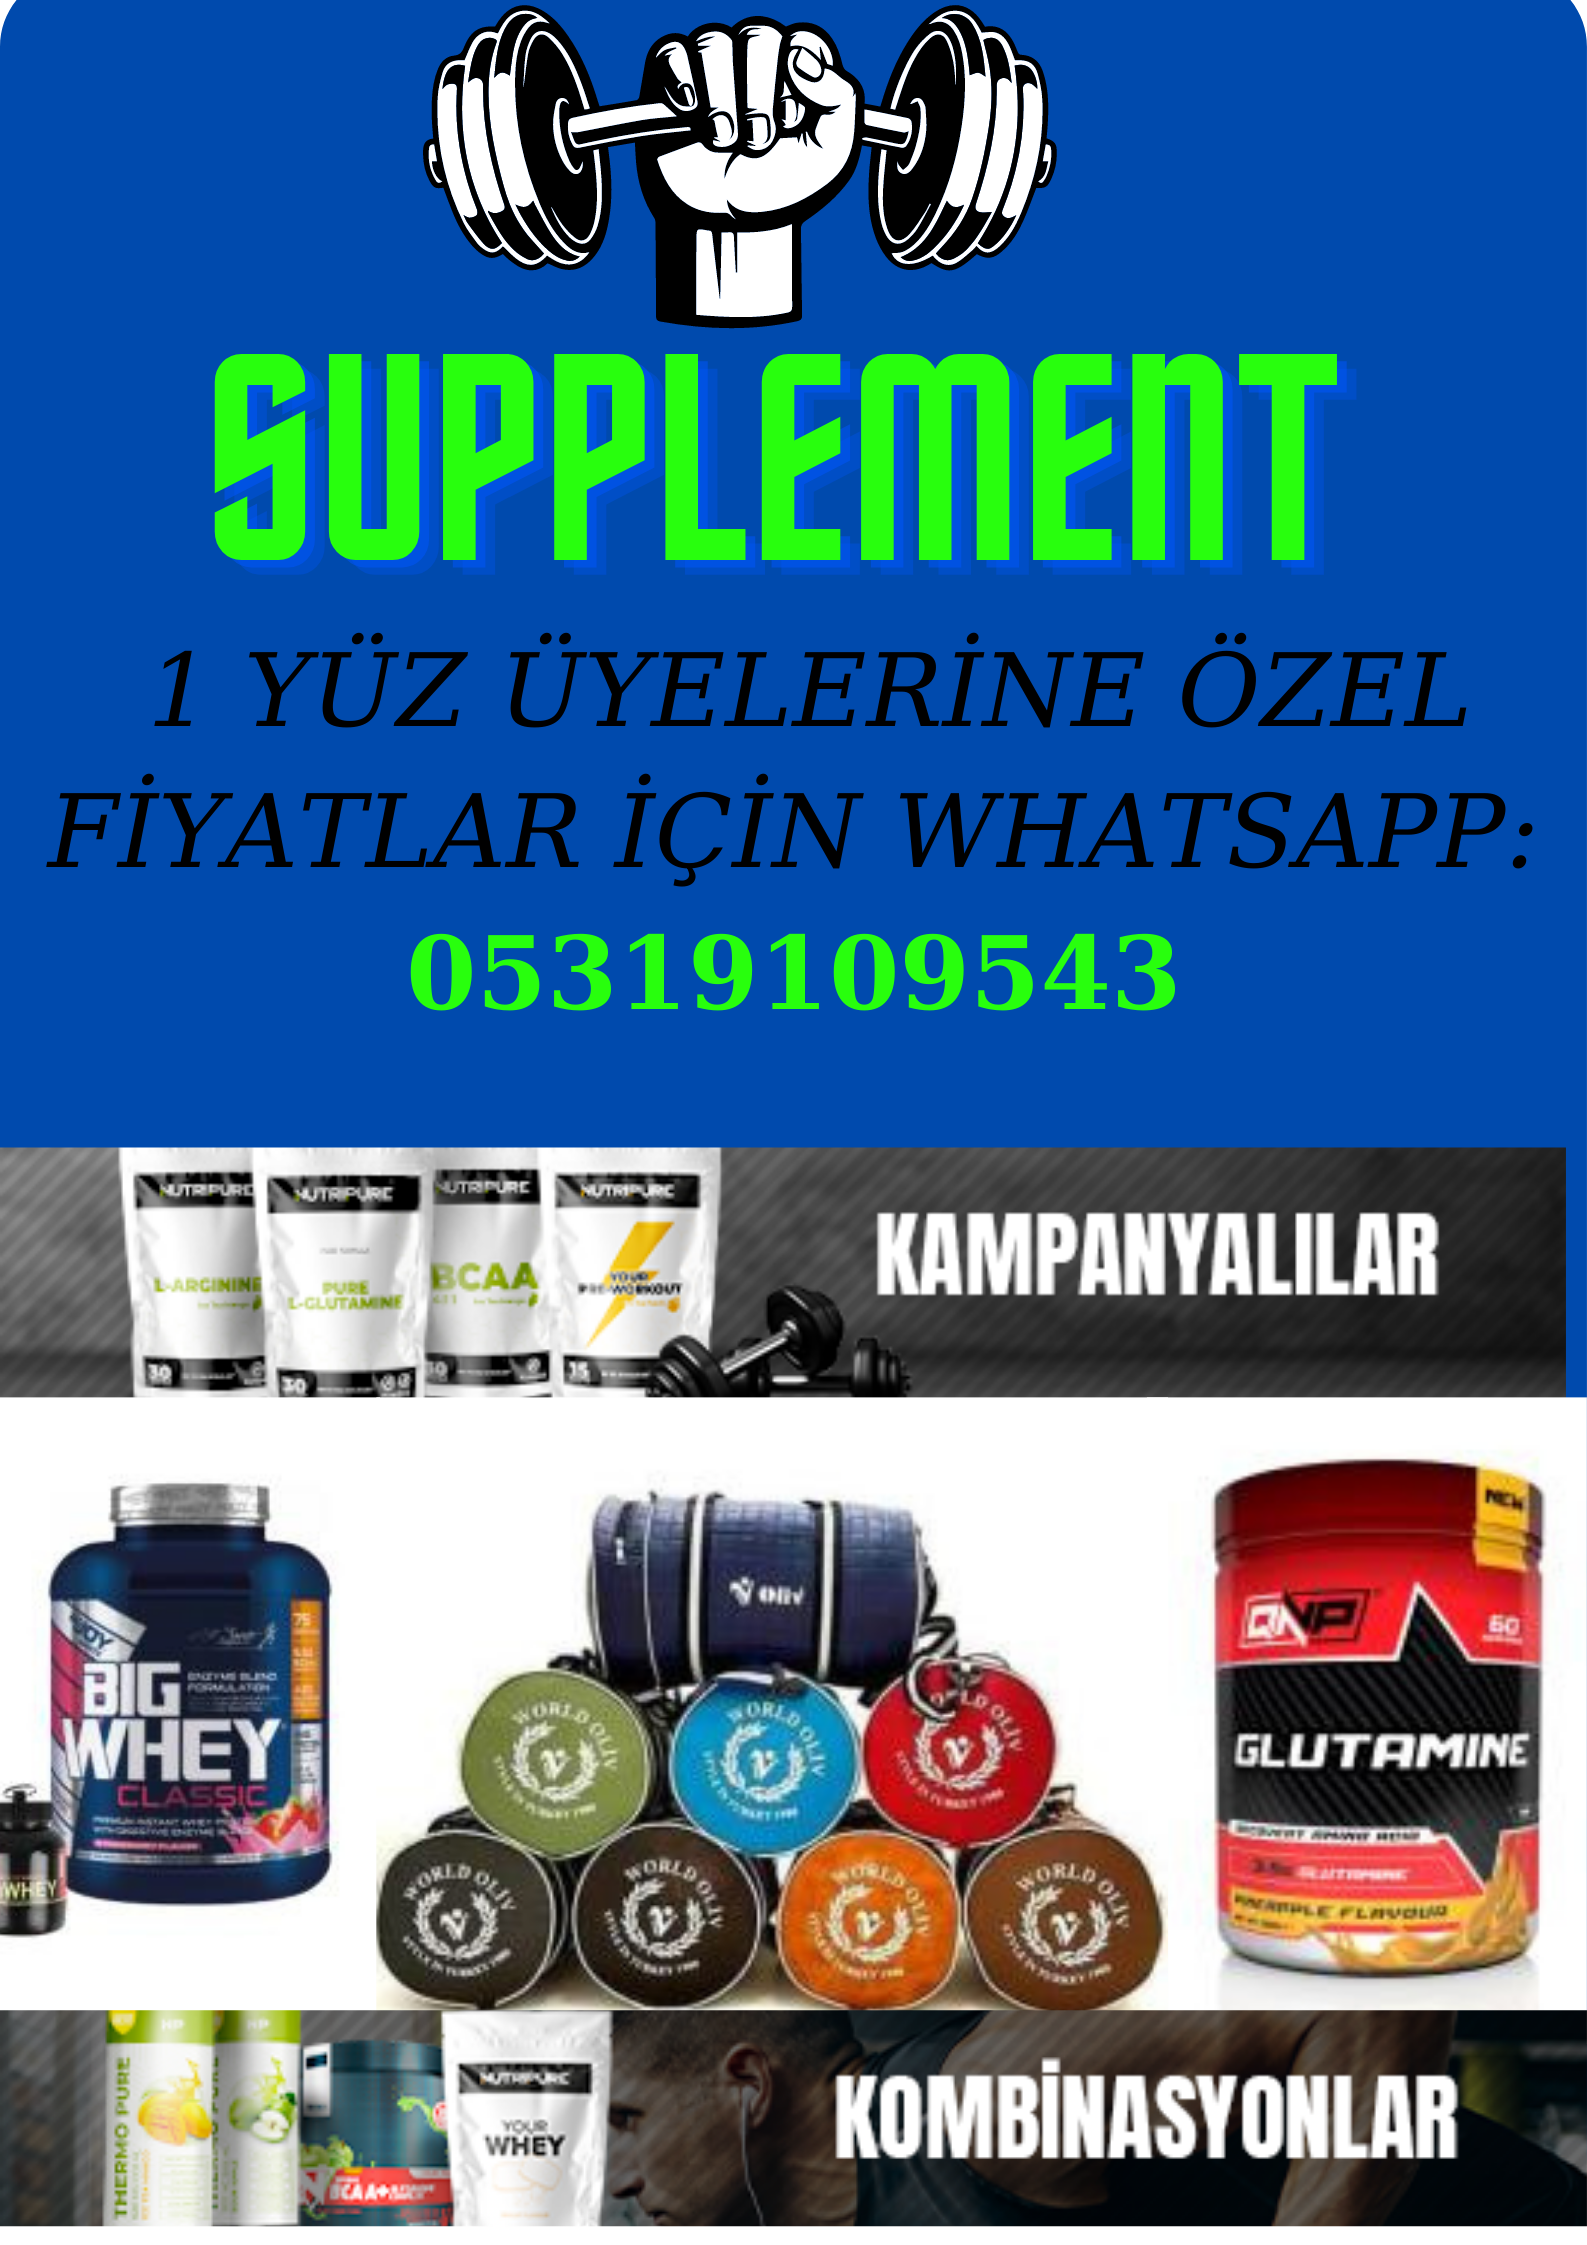 SUPPLEMENT (2).png